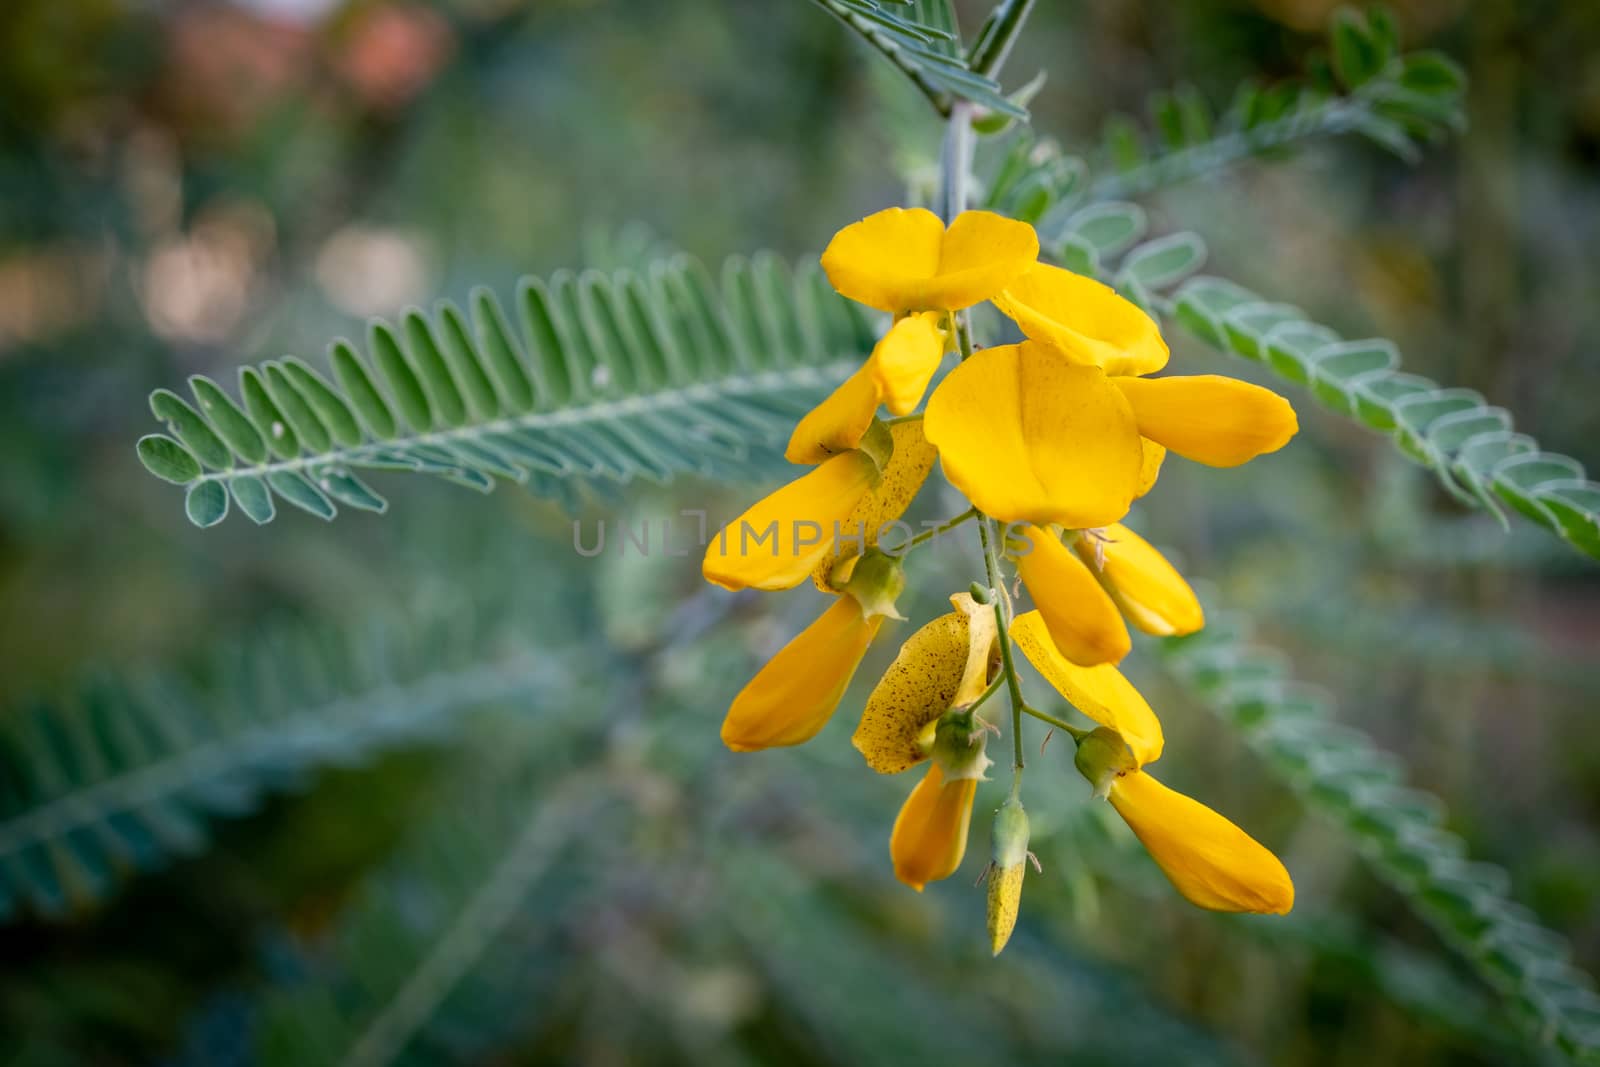 The Yellow Sesbania bloom flower can be used to make food and desserts